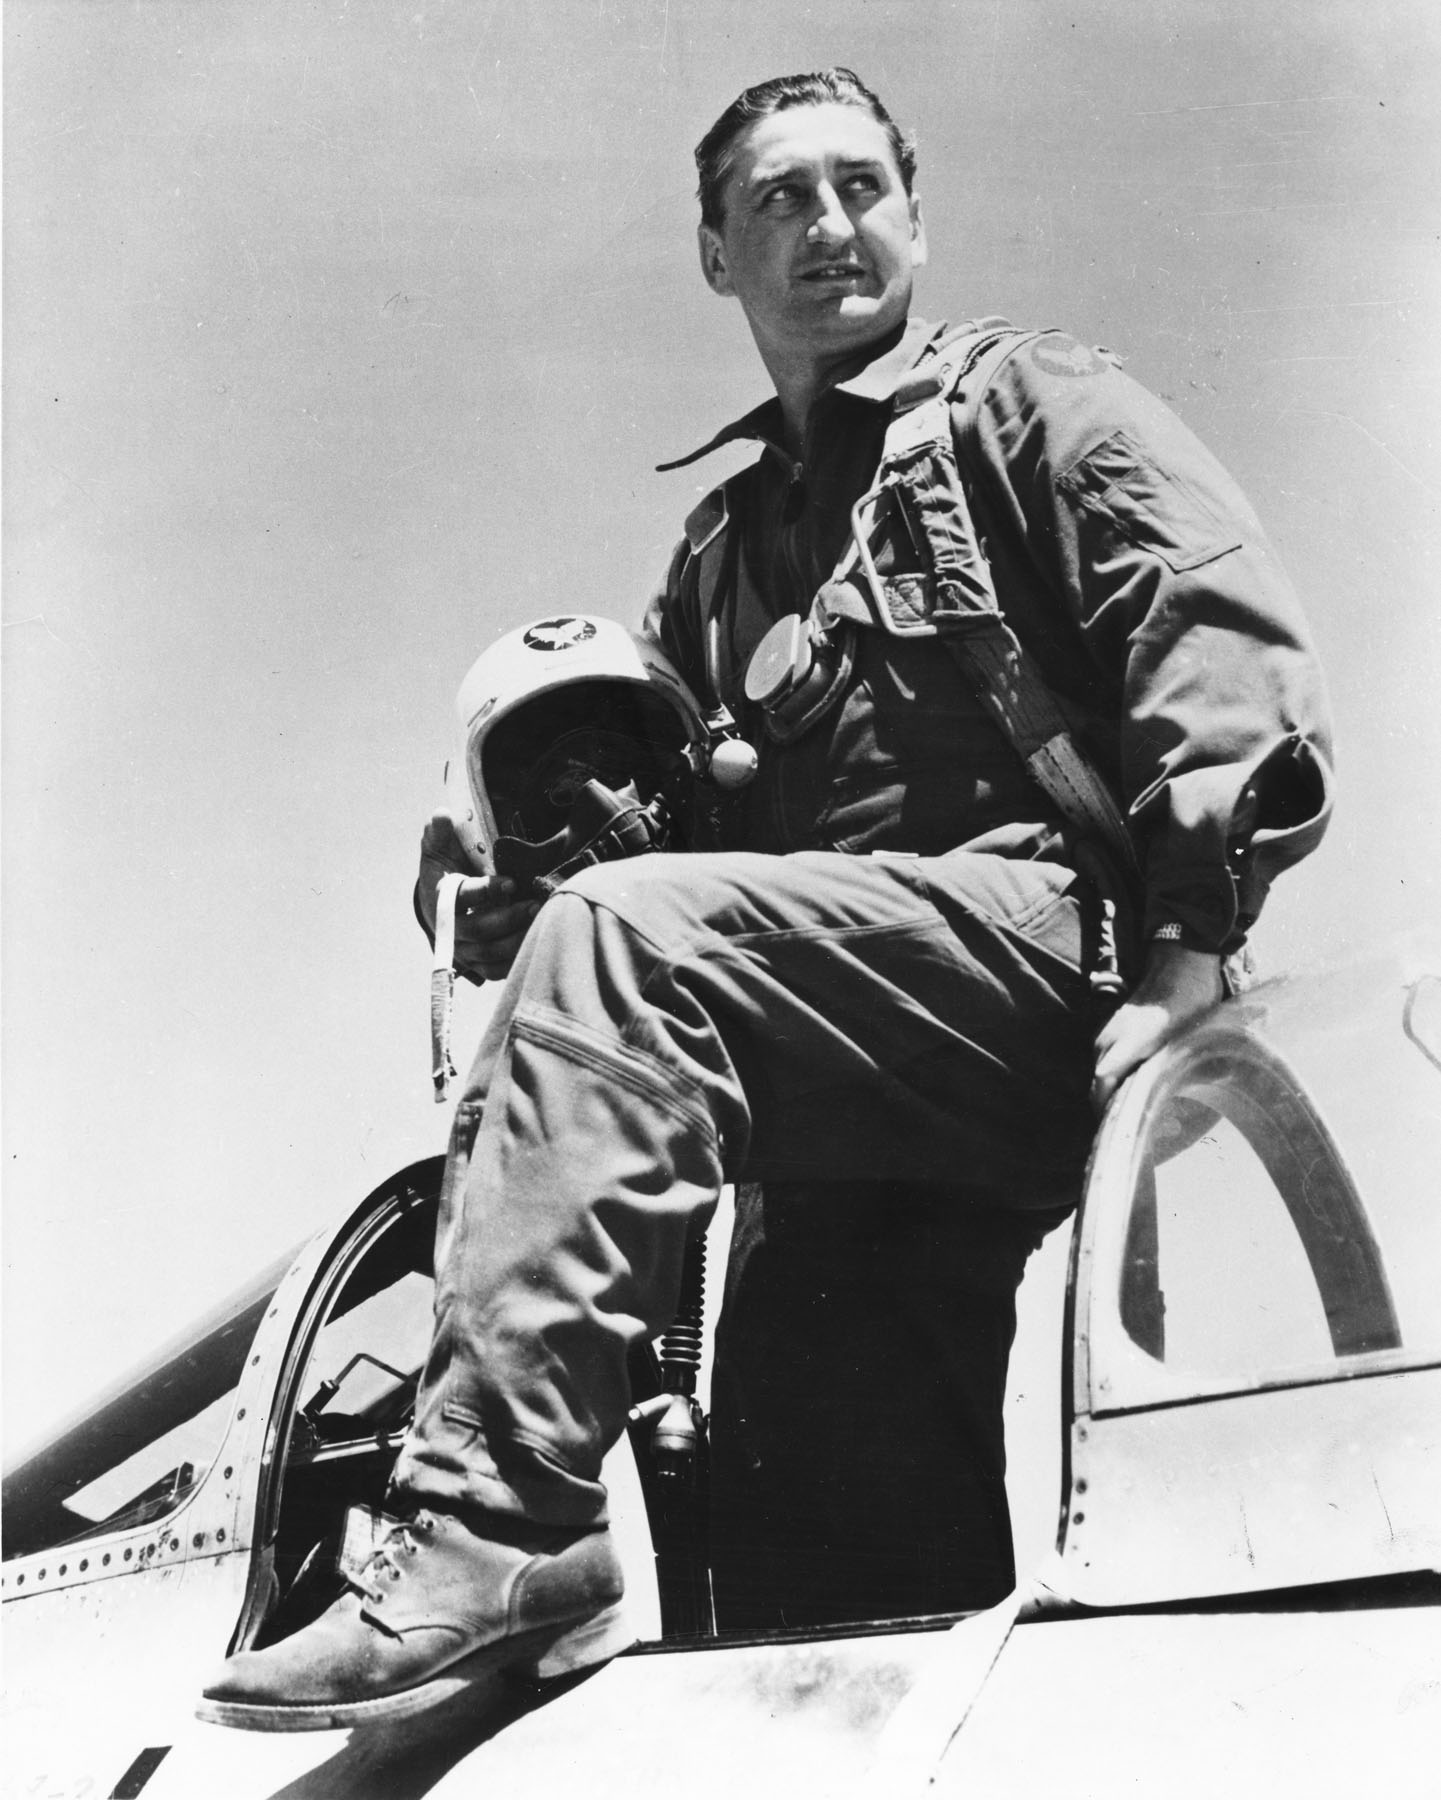 Lieutenant Colonel Francis Stanley Gabreski, United States Air Force, 51st Fighter Interceptor Wing, standing in the cockpit of his North American Aviation F-86E Sabre, Korea, ca. 1952. (U.S. Air Force)